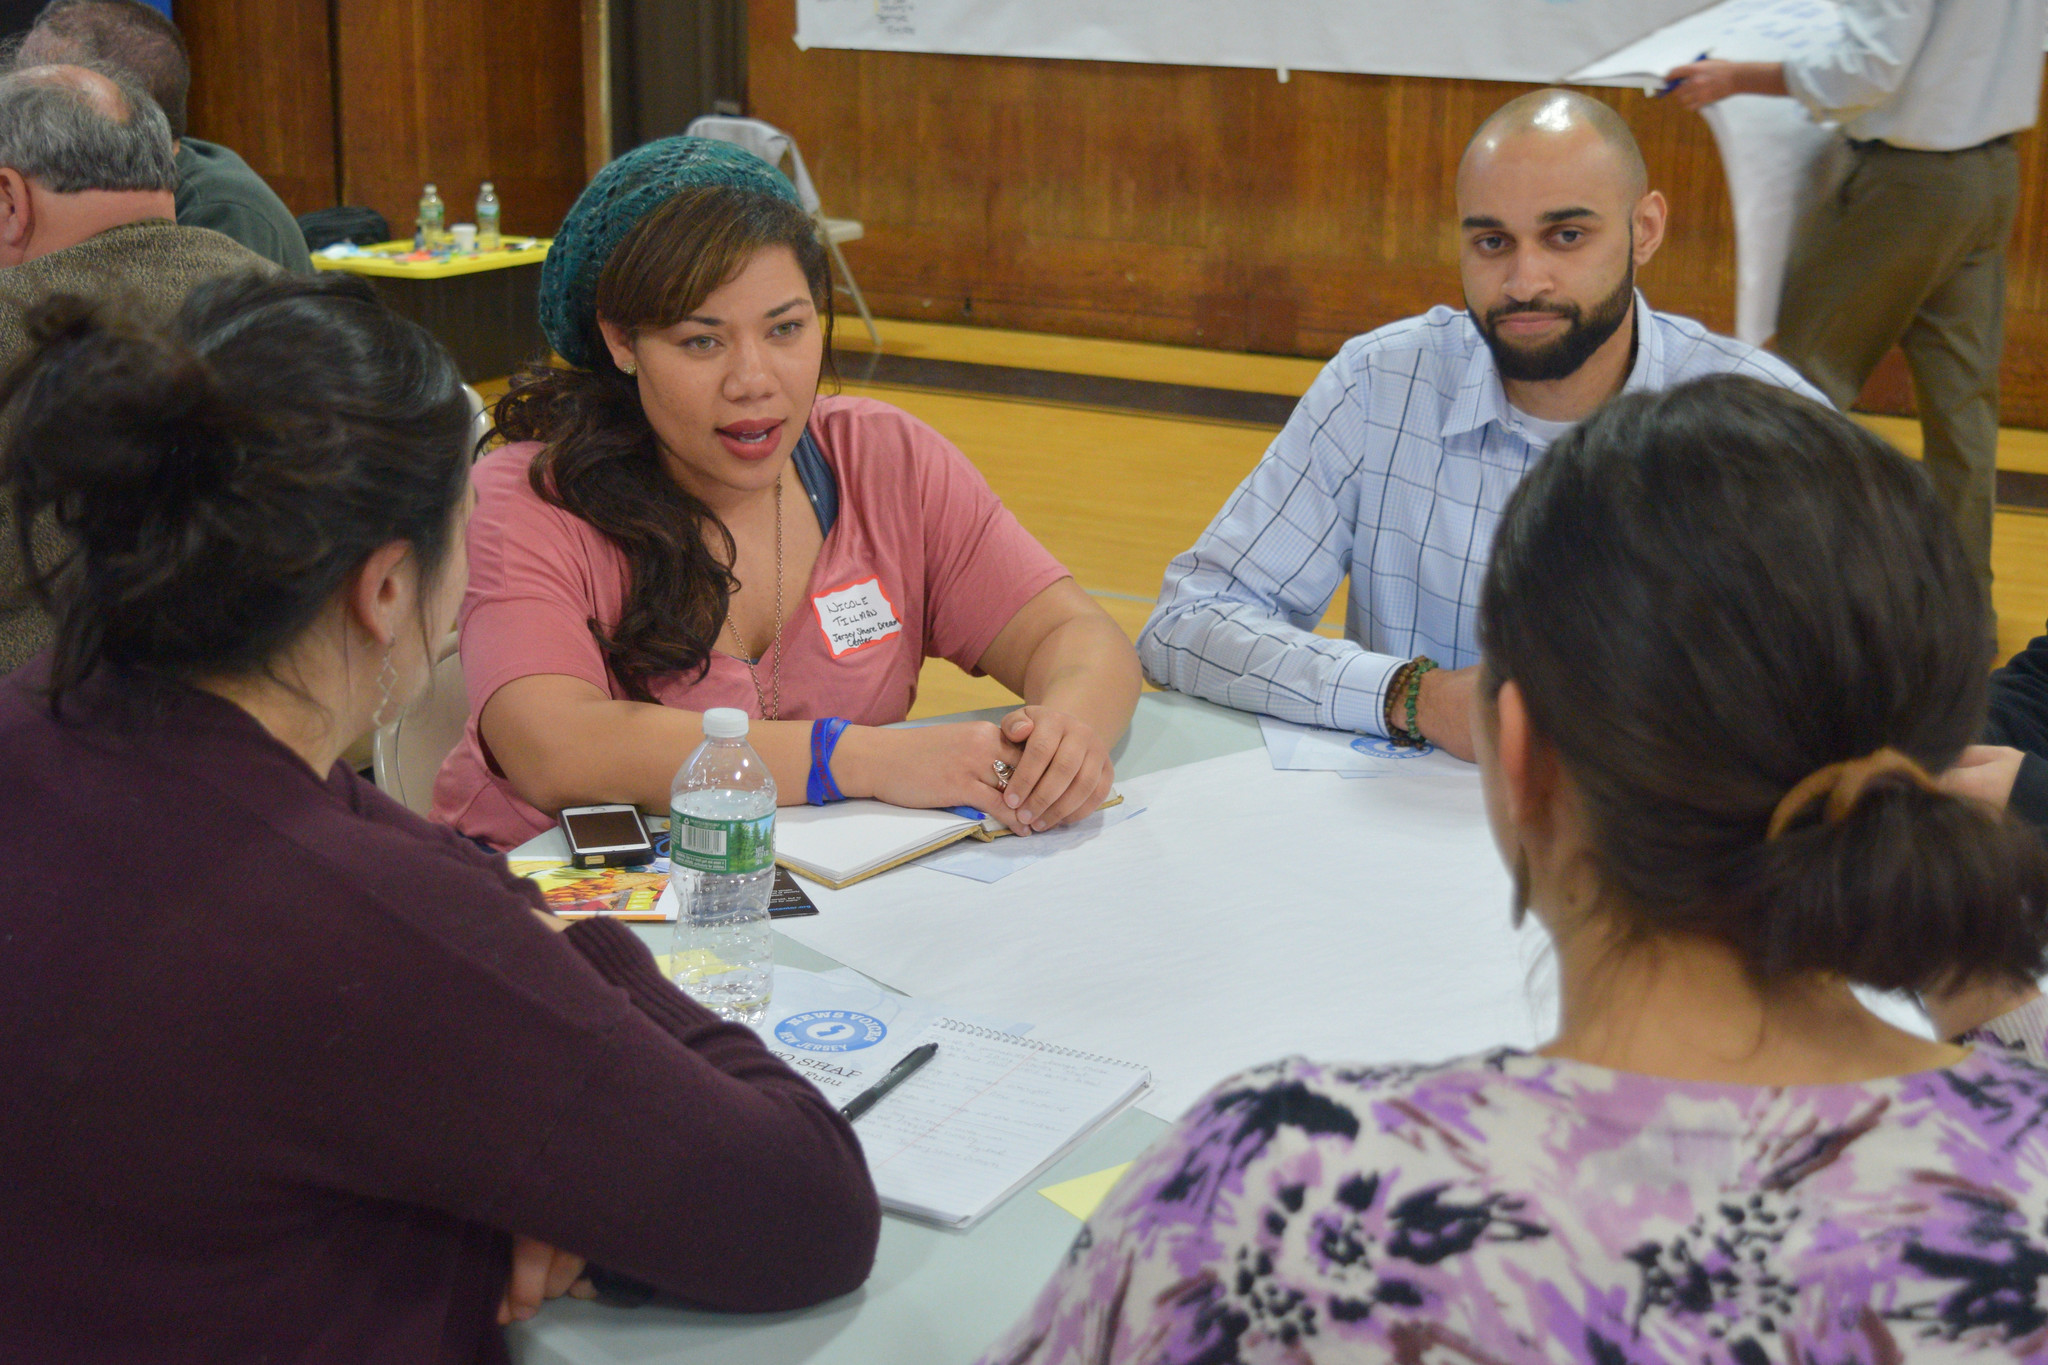 Community members in New Jersey sitting at a table discuss what they want from local news